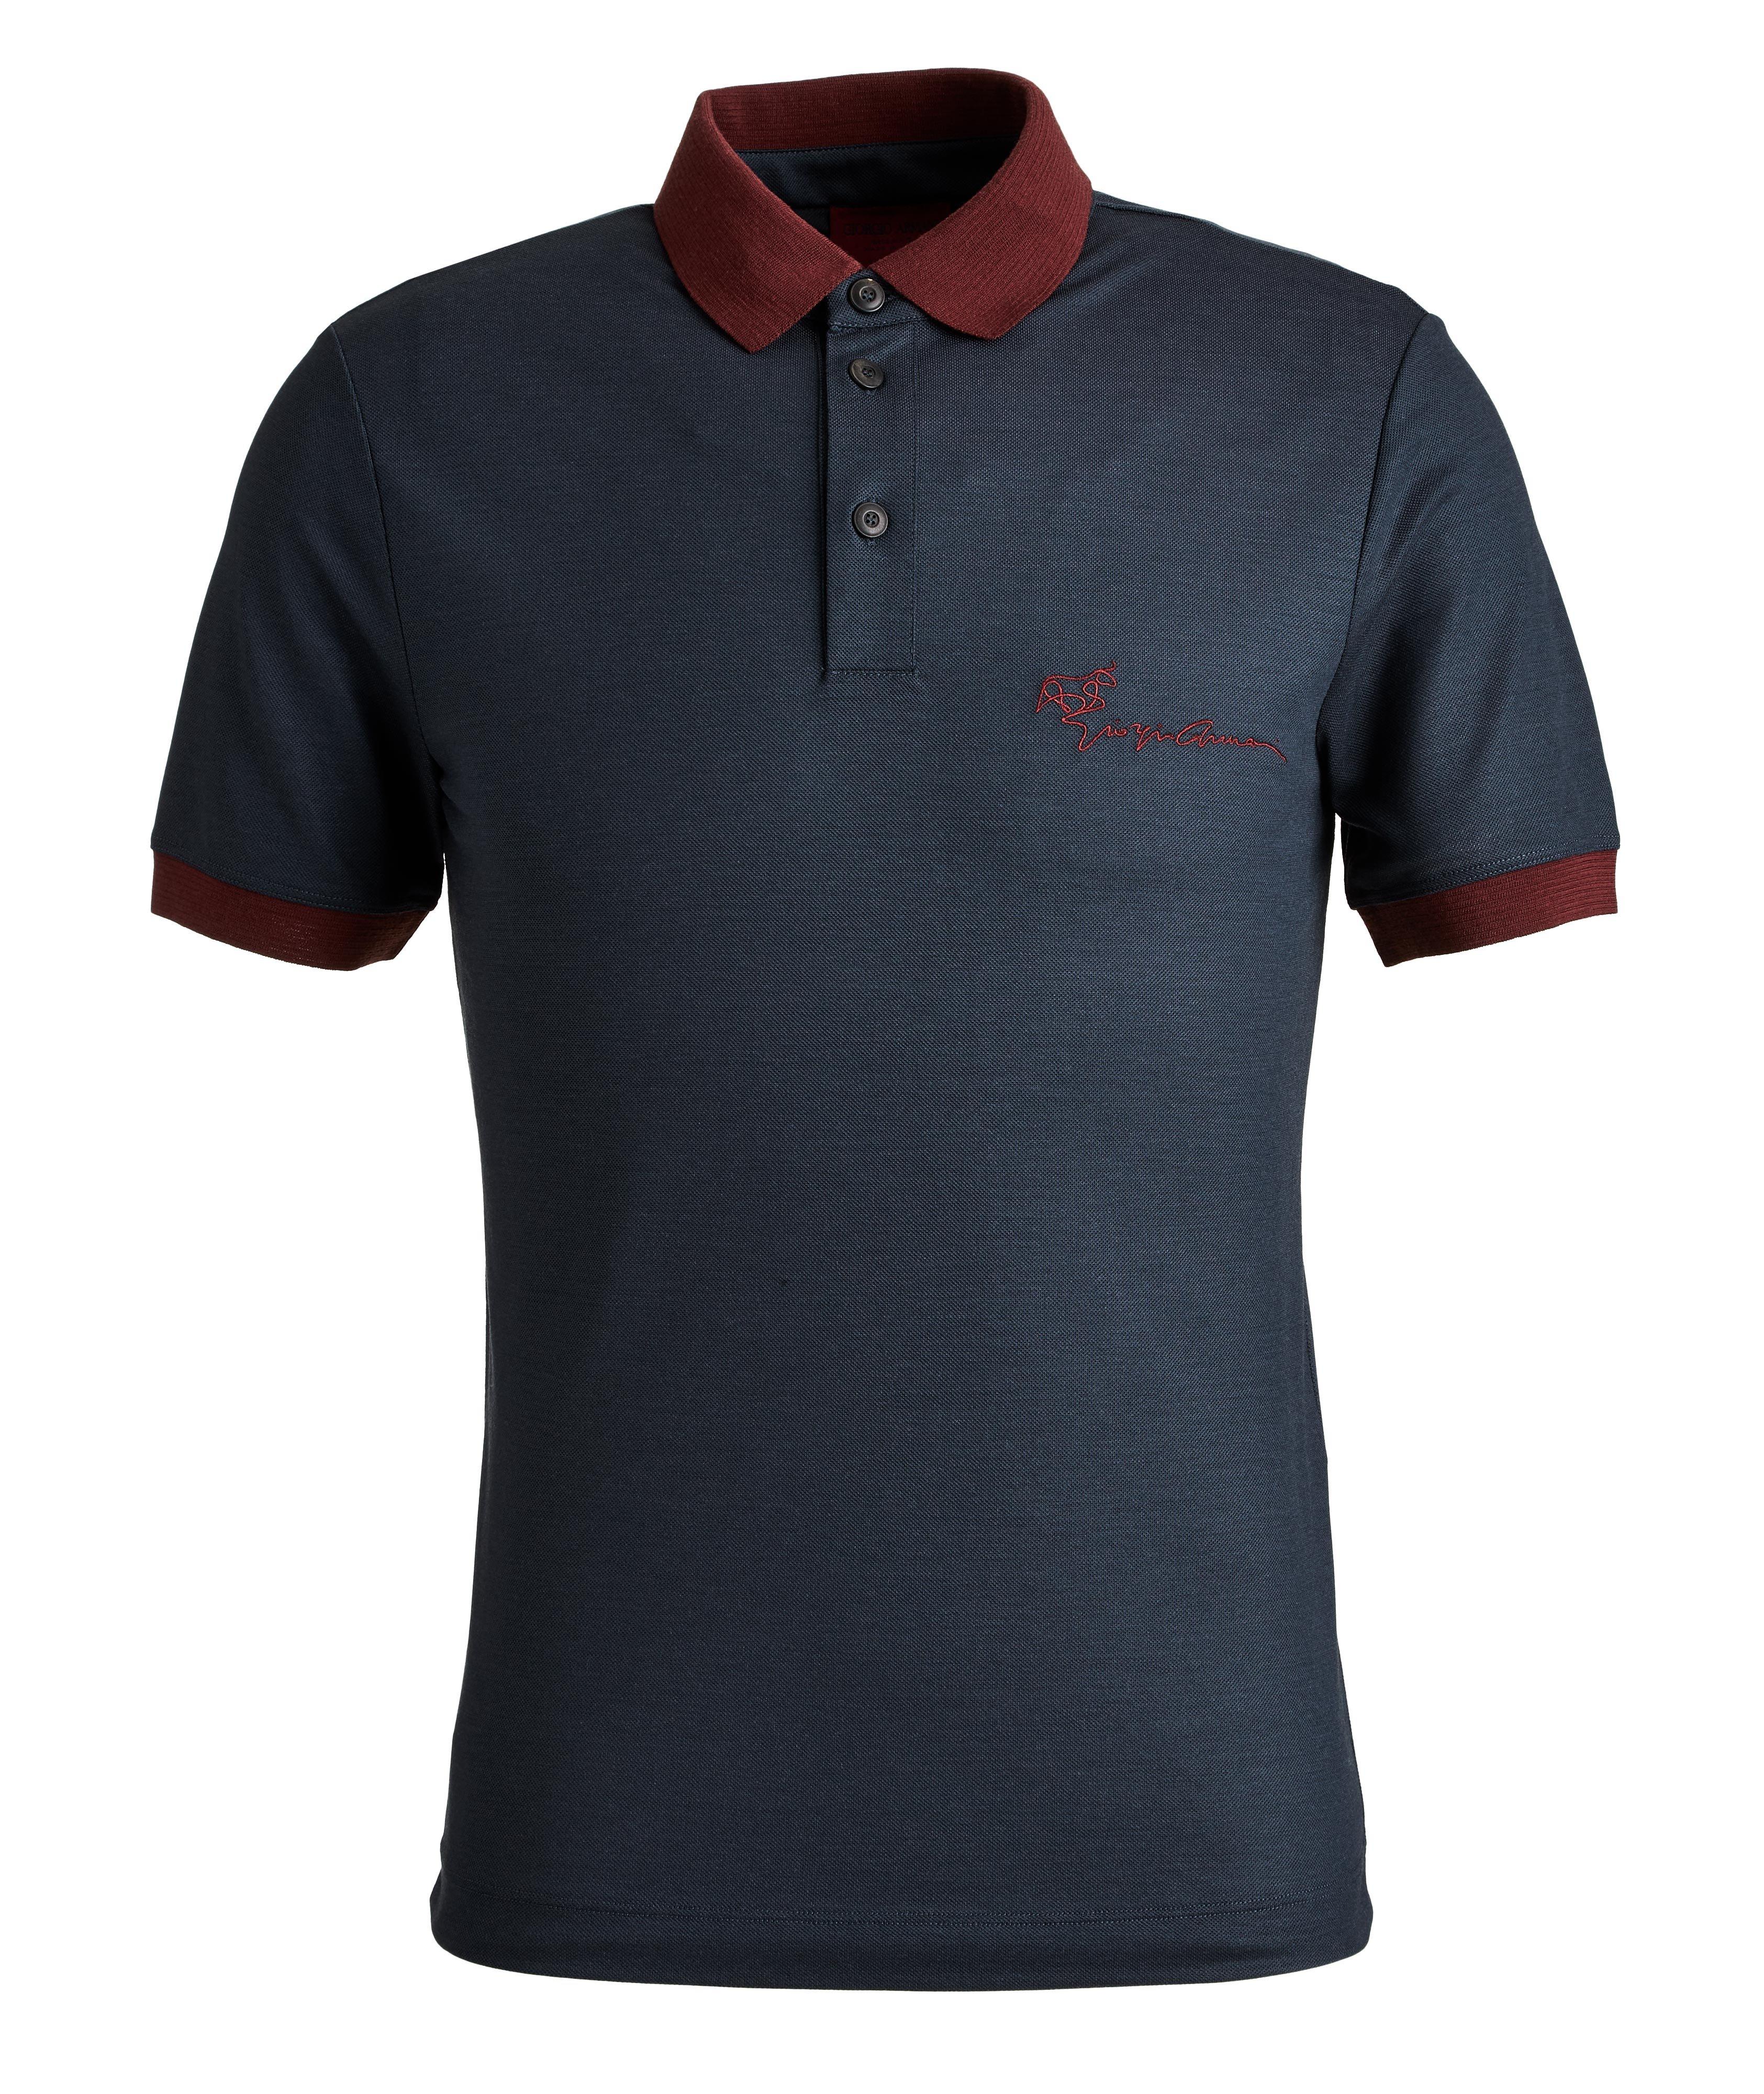 Limited Edition Piqué Virgin Wool Polo image 0